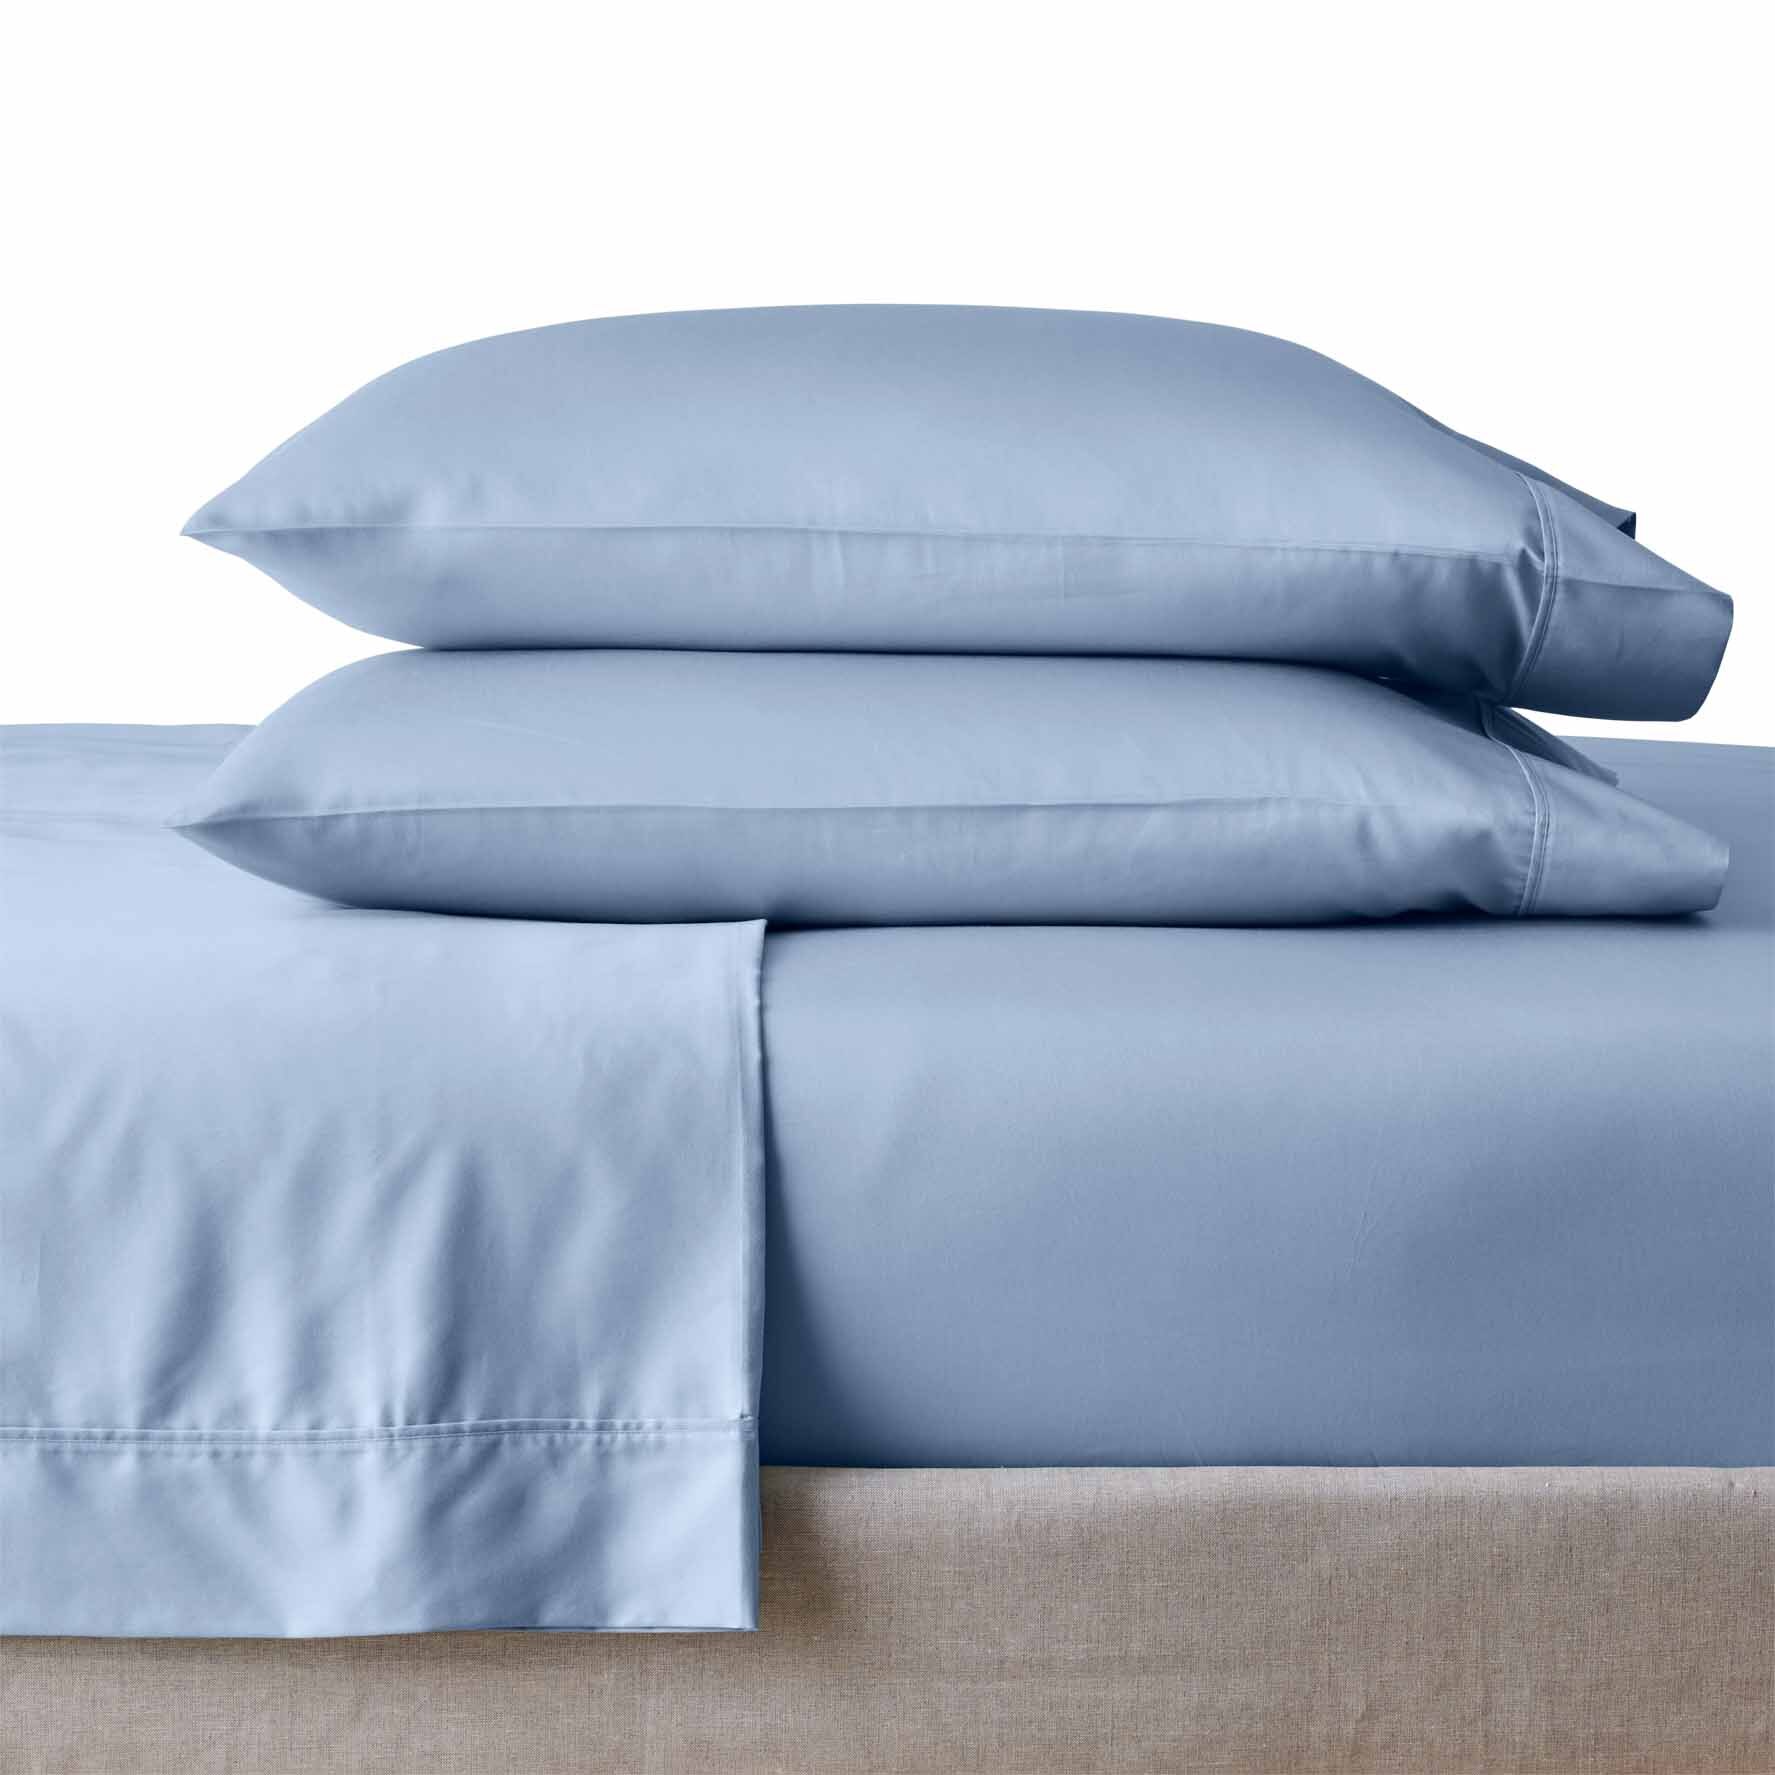 Better Homes & Gardens 100% Cotton Sateen 300 Thread Count Sheet Set, Full, Blue Water - image 1 of 6